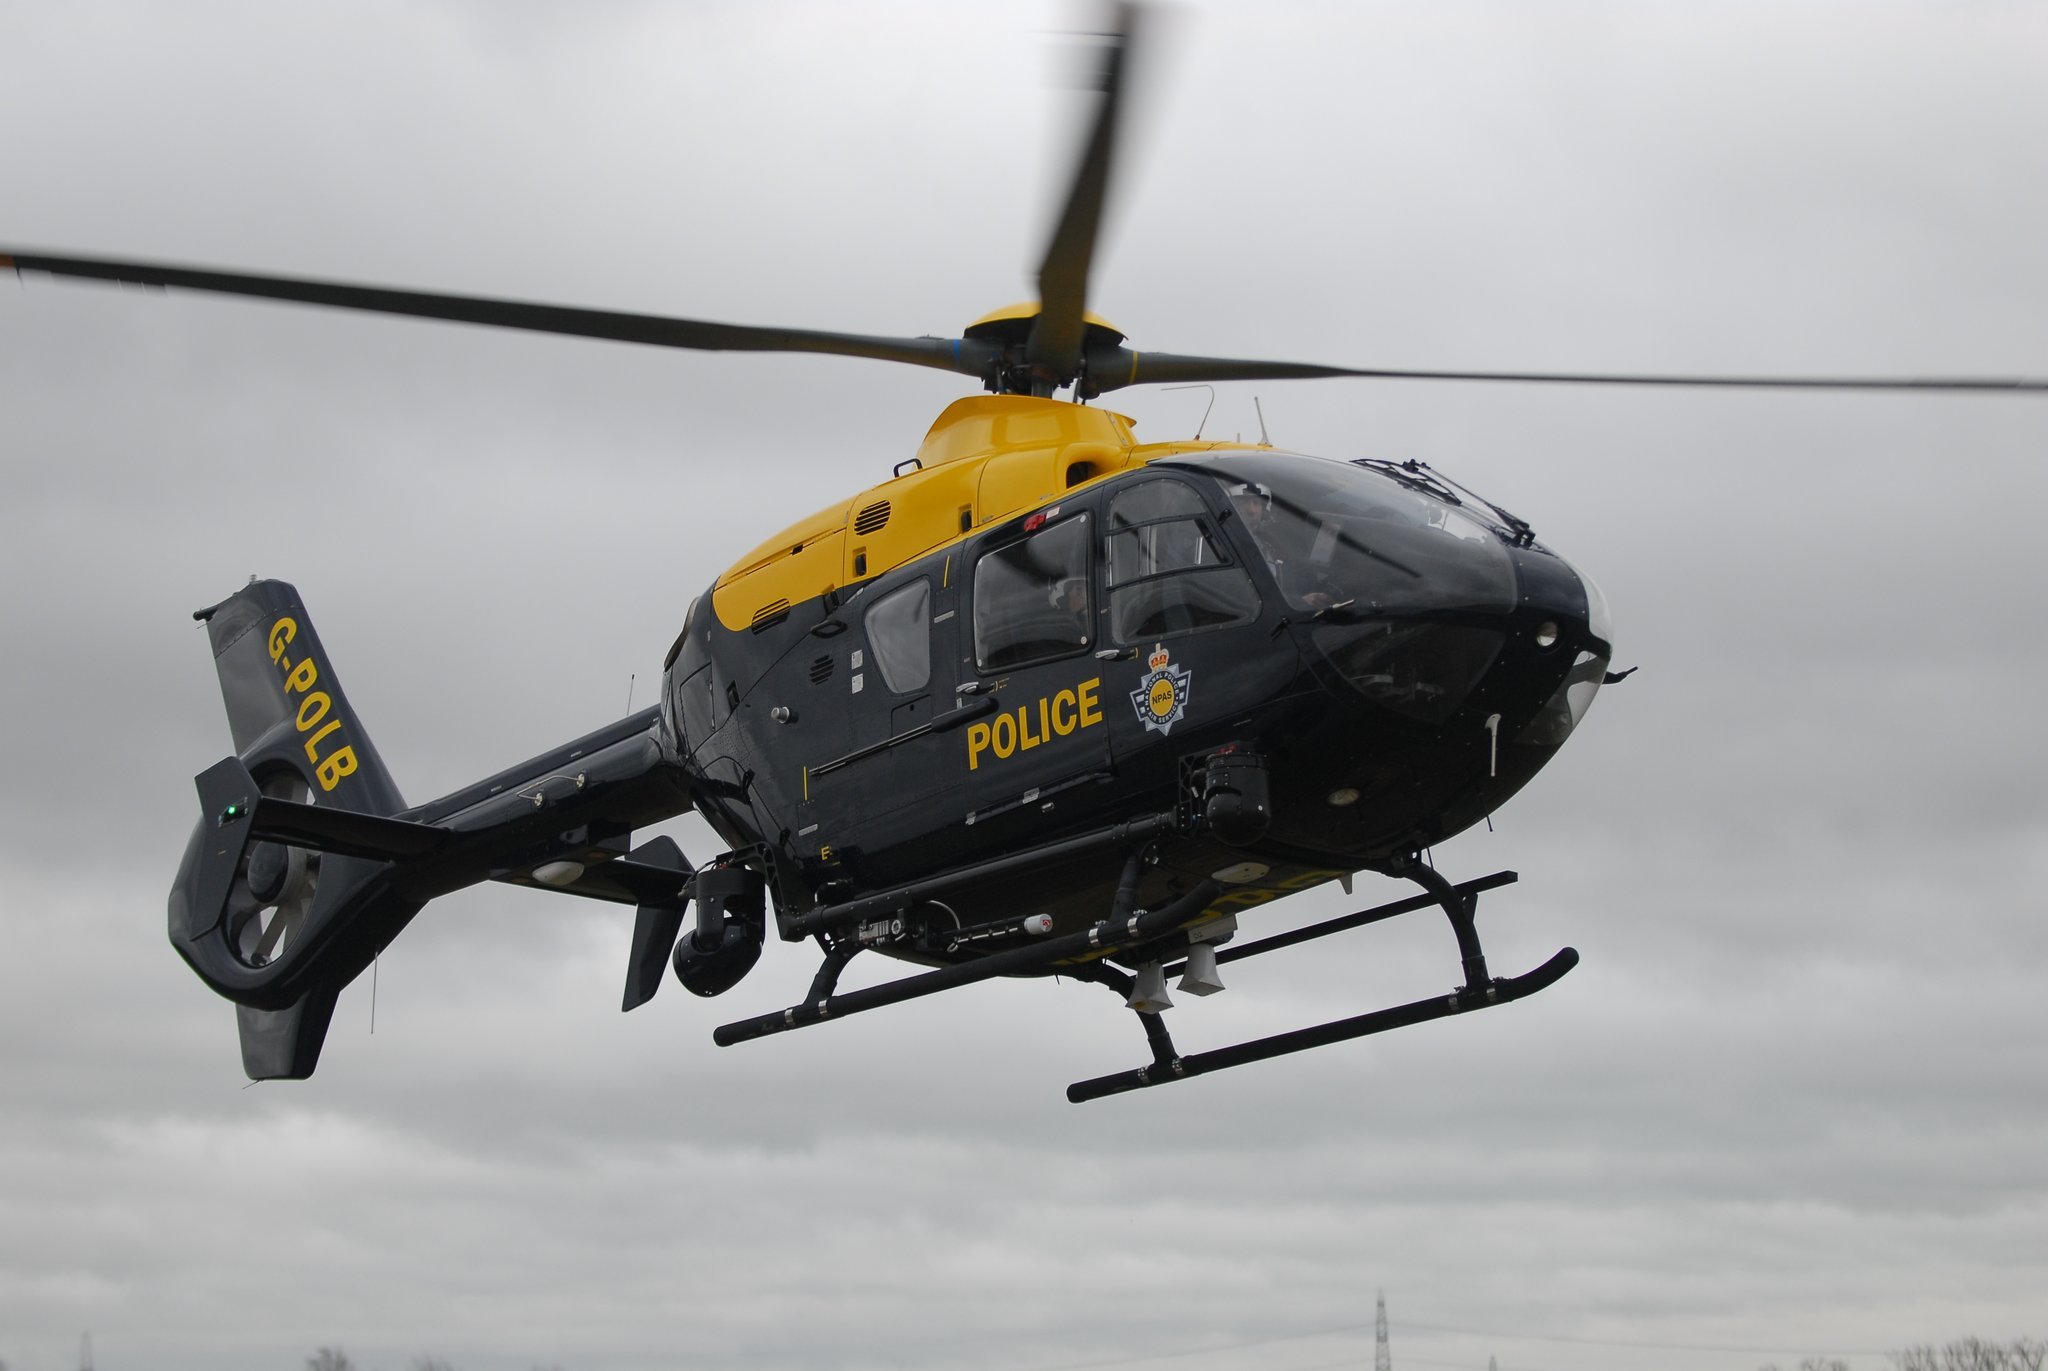 Police helicopter and armed officers descend on Acomb after disturbance - three arrested